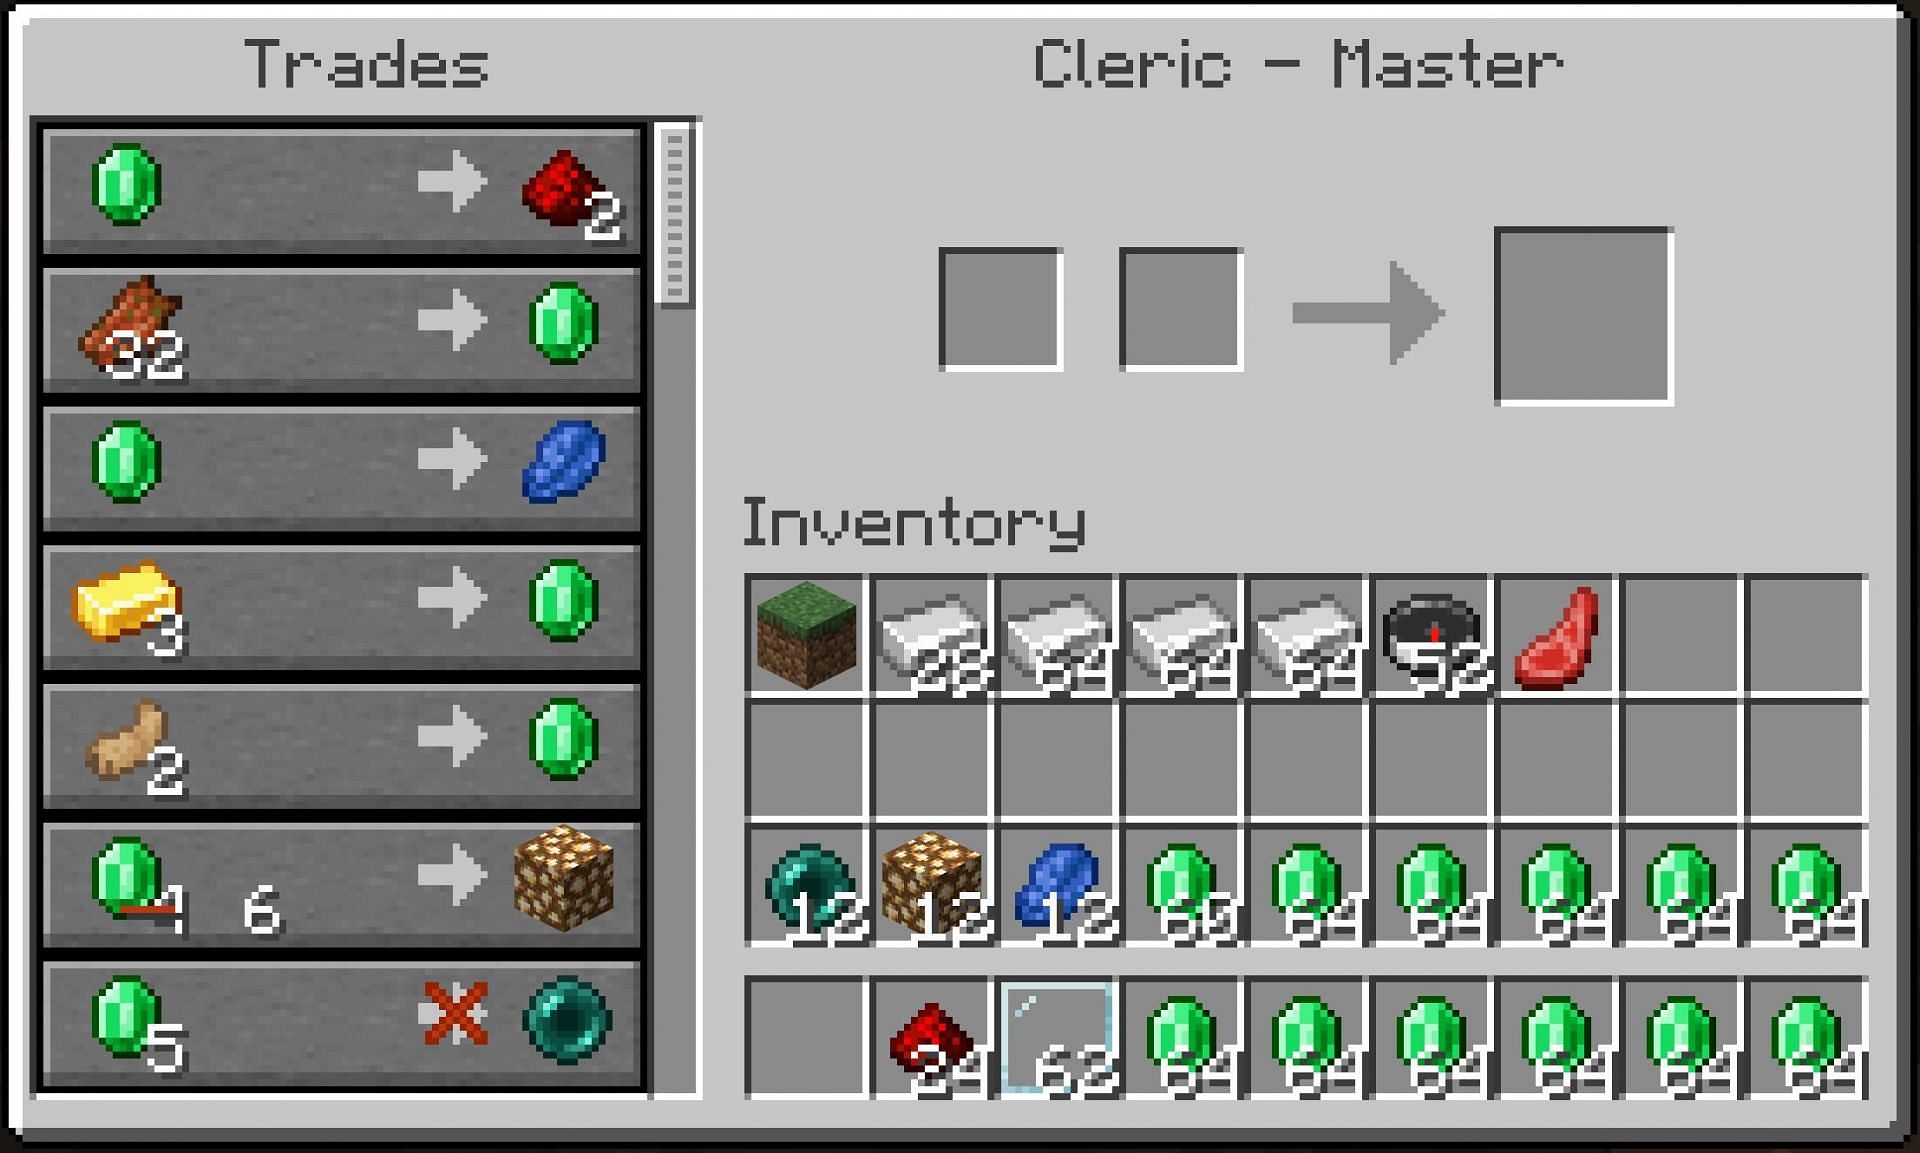 Clerics offer a ton of miscellaneous useful items for trade (Image via Mojang)